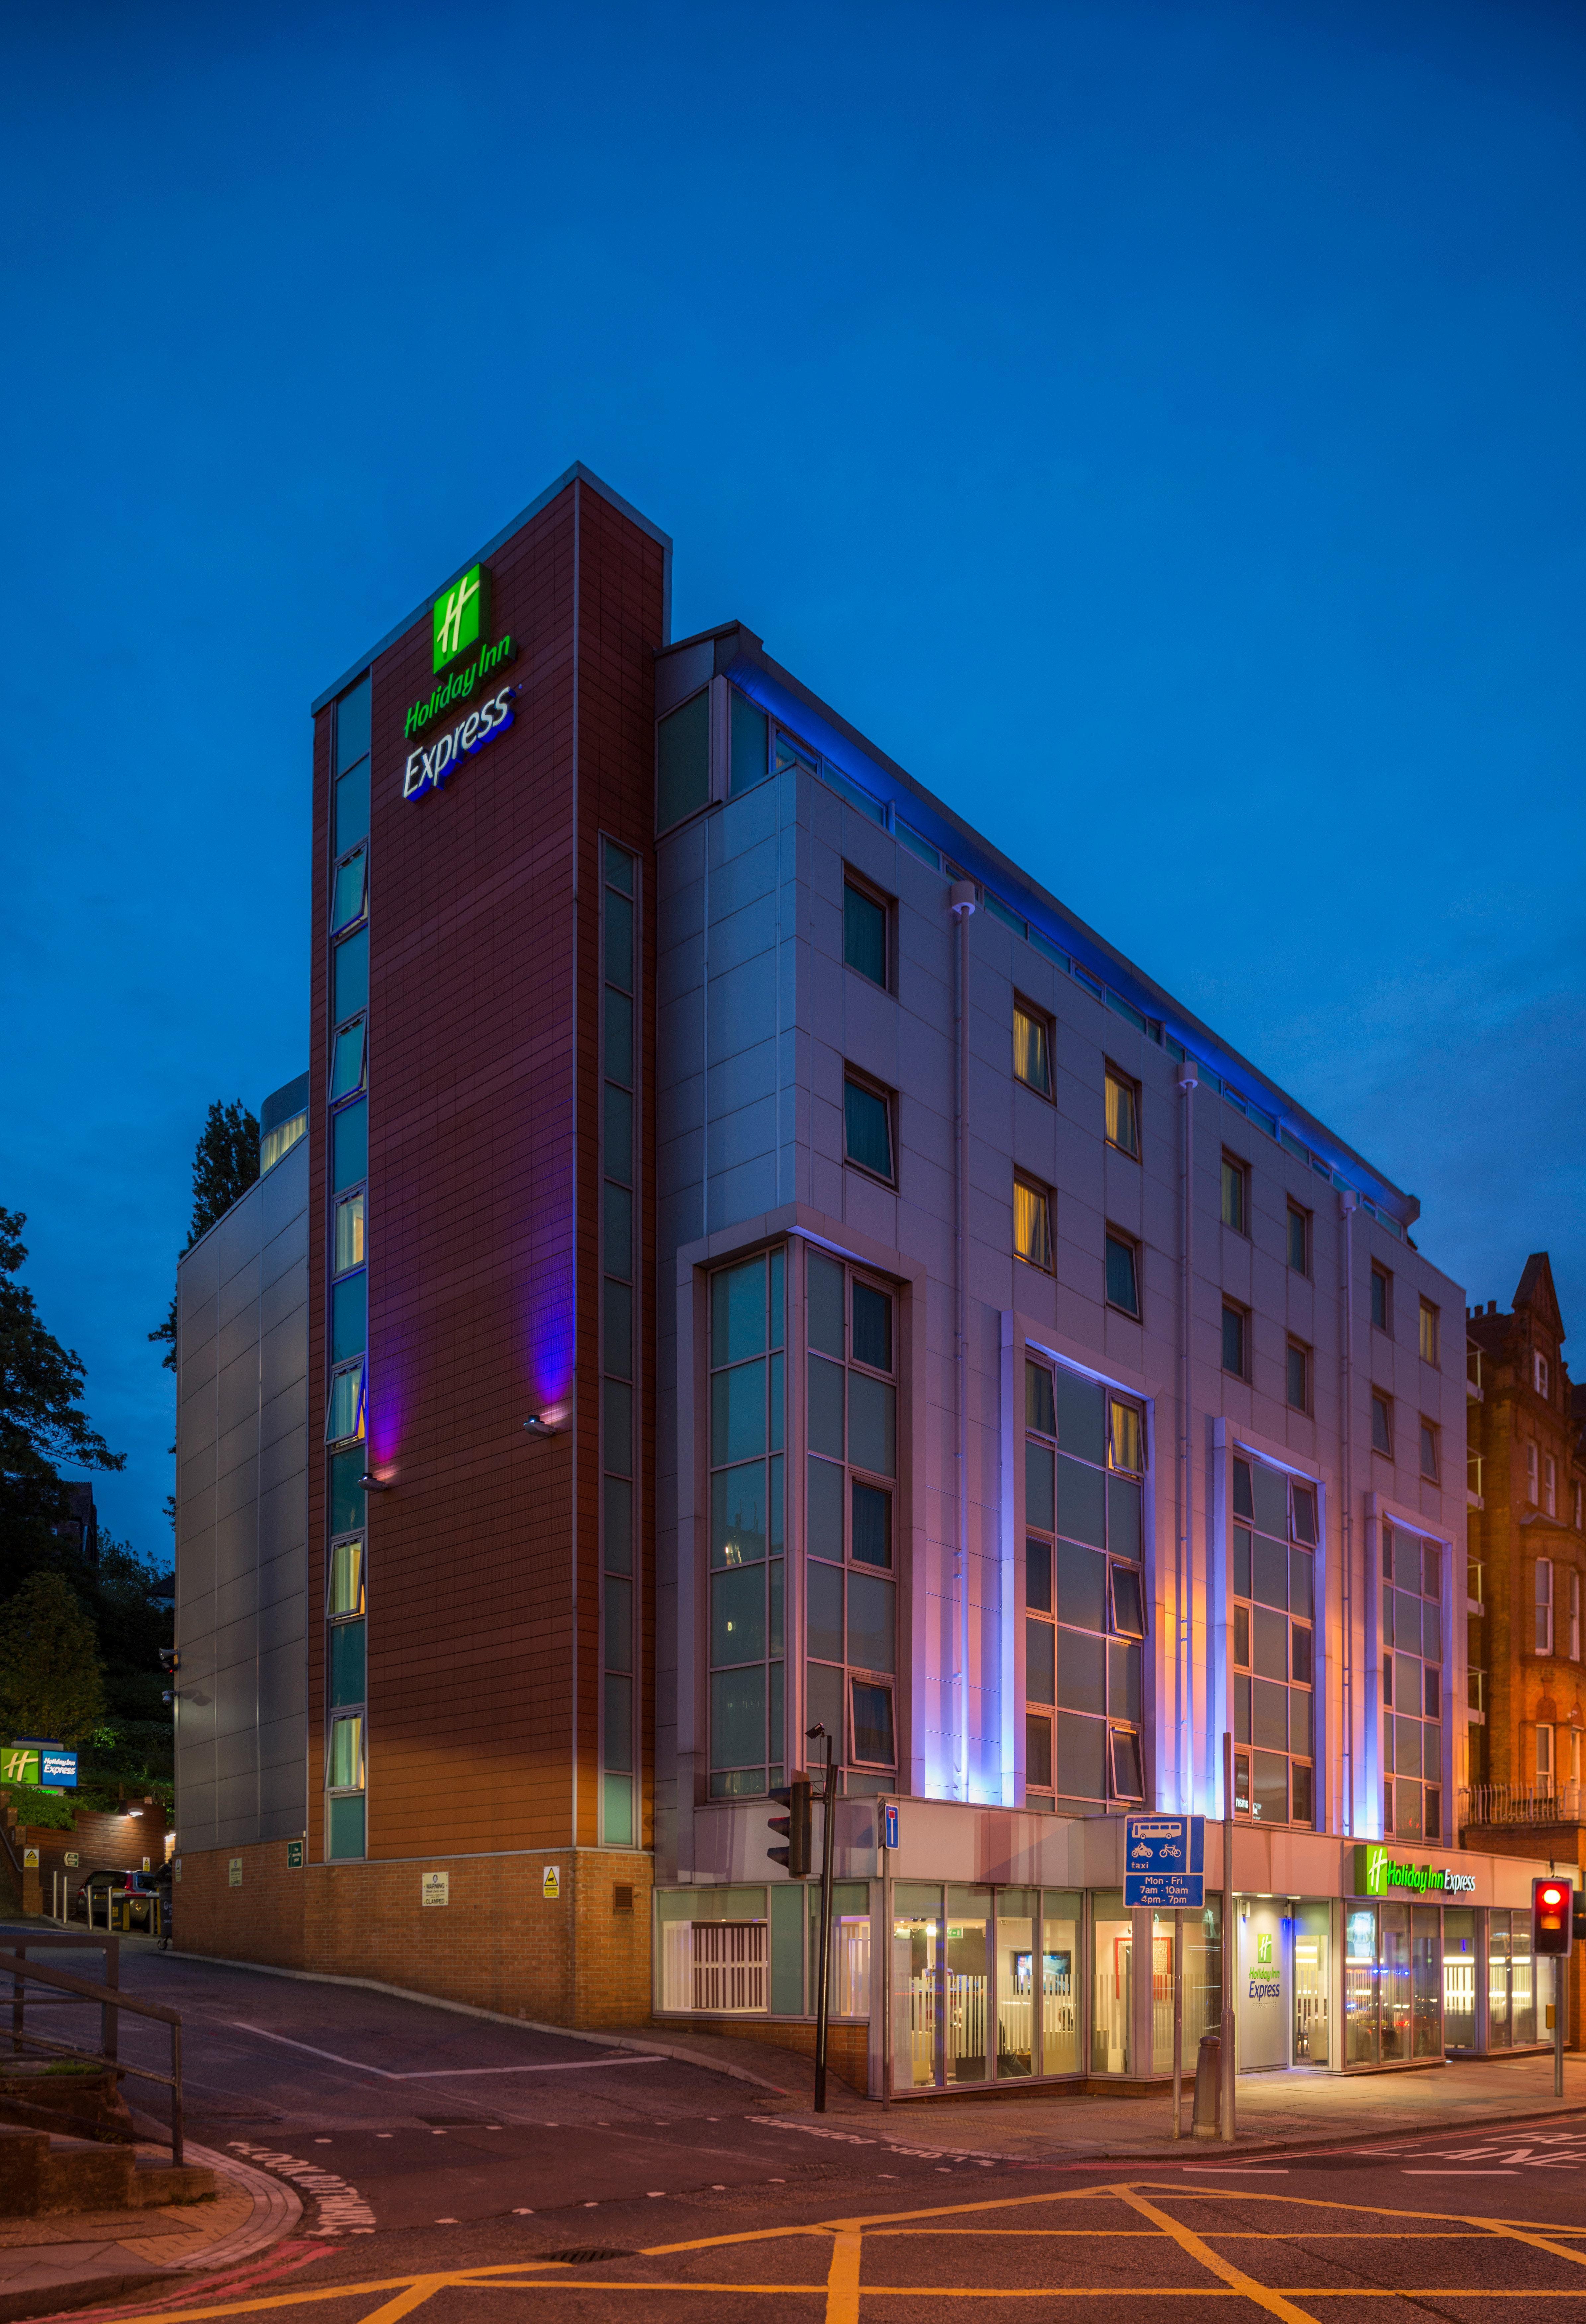 Holiday Inn Express London-Swiss Cottage Exterior foto